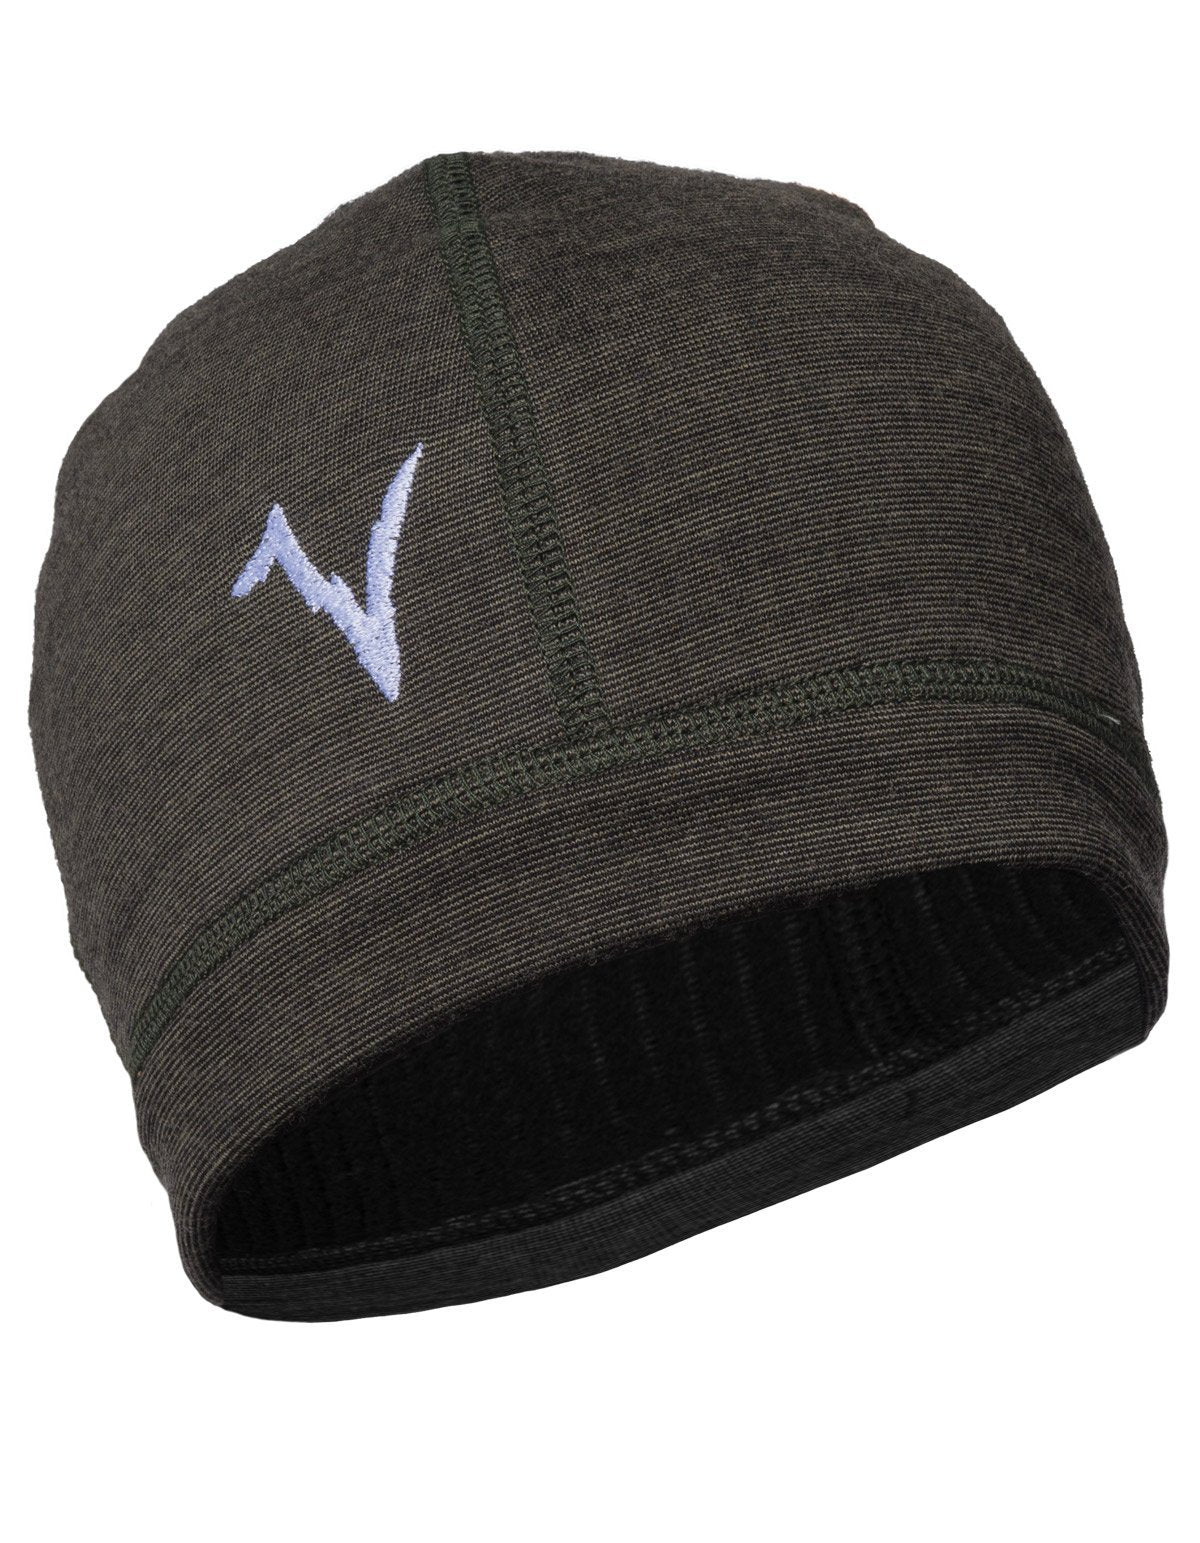 PRECISION BLENDED BEANIE (WOOL) by VOORMI